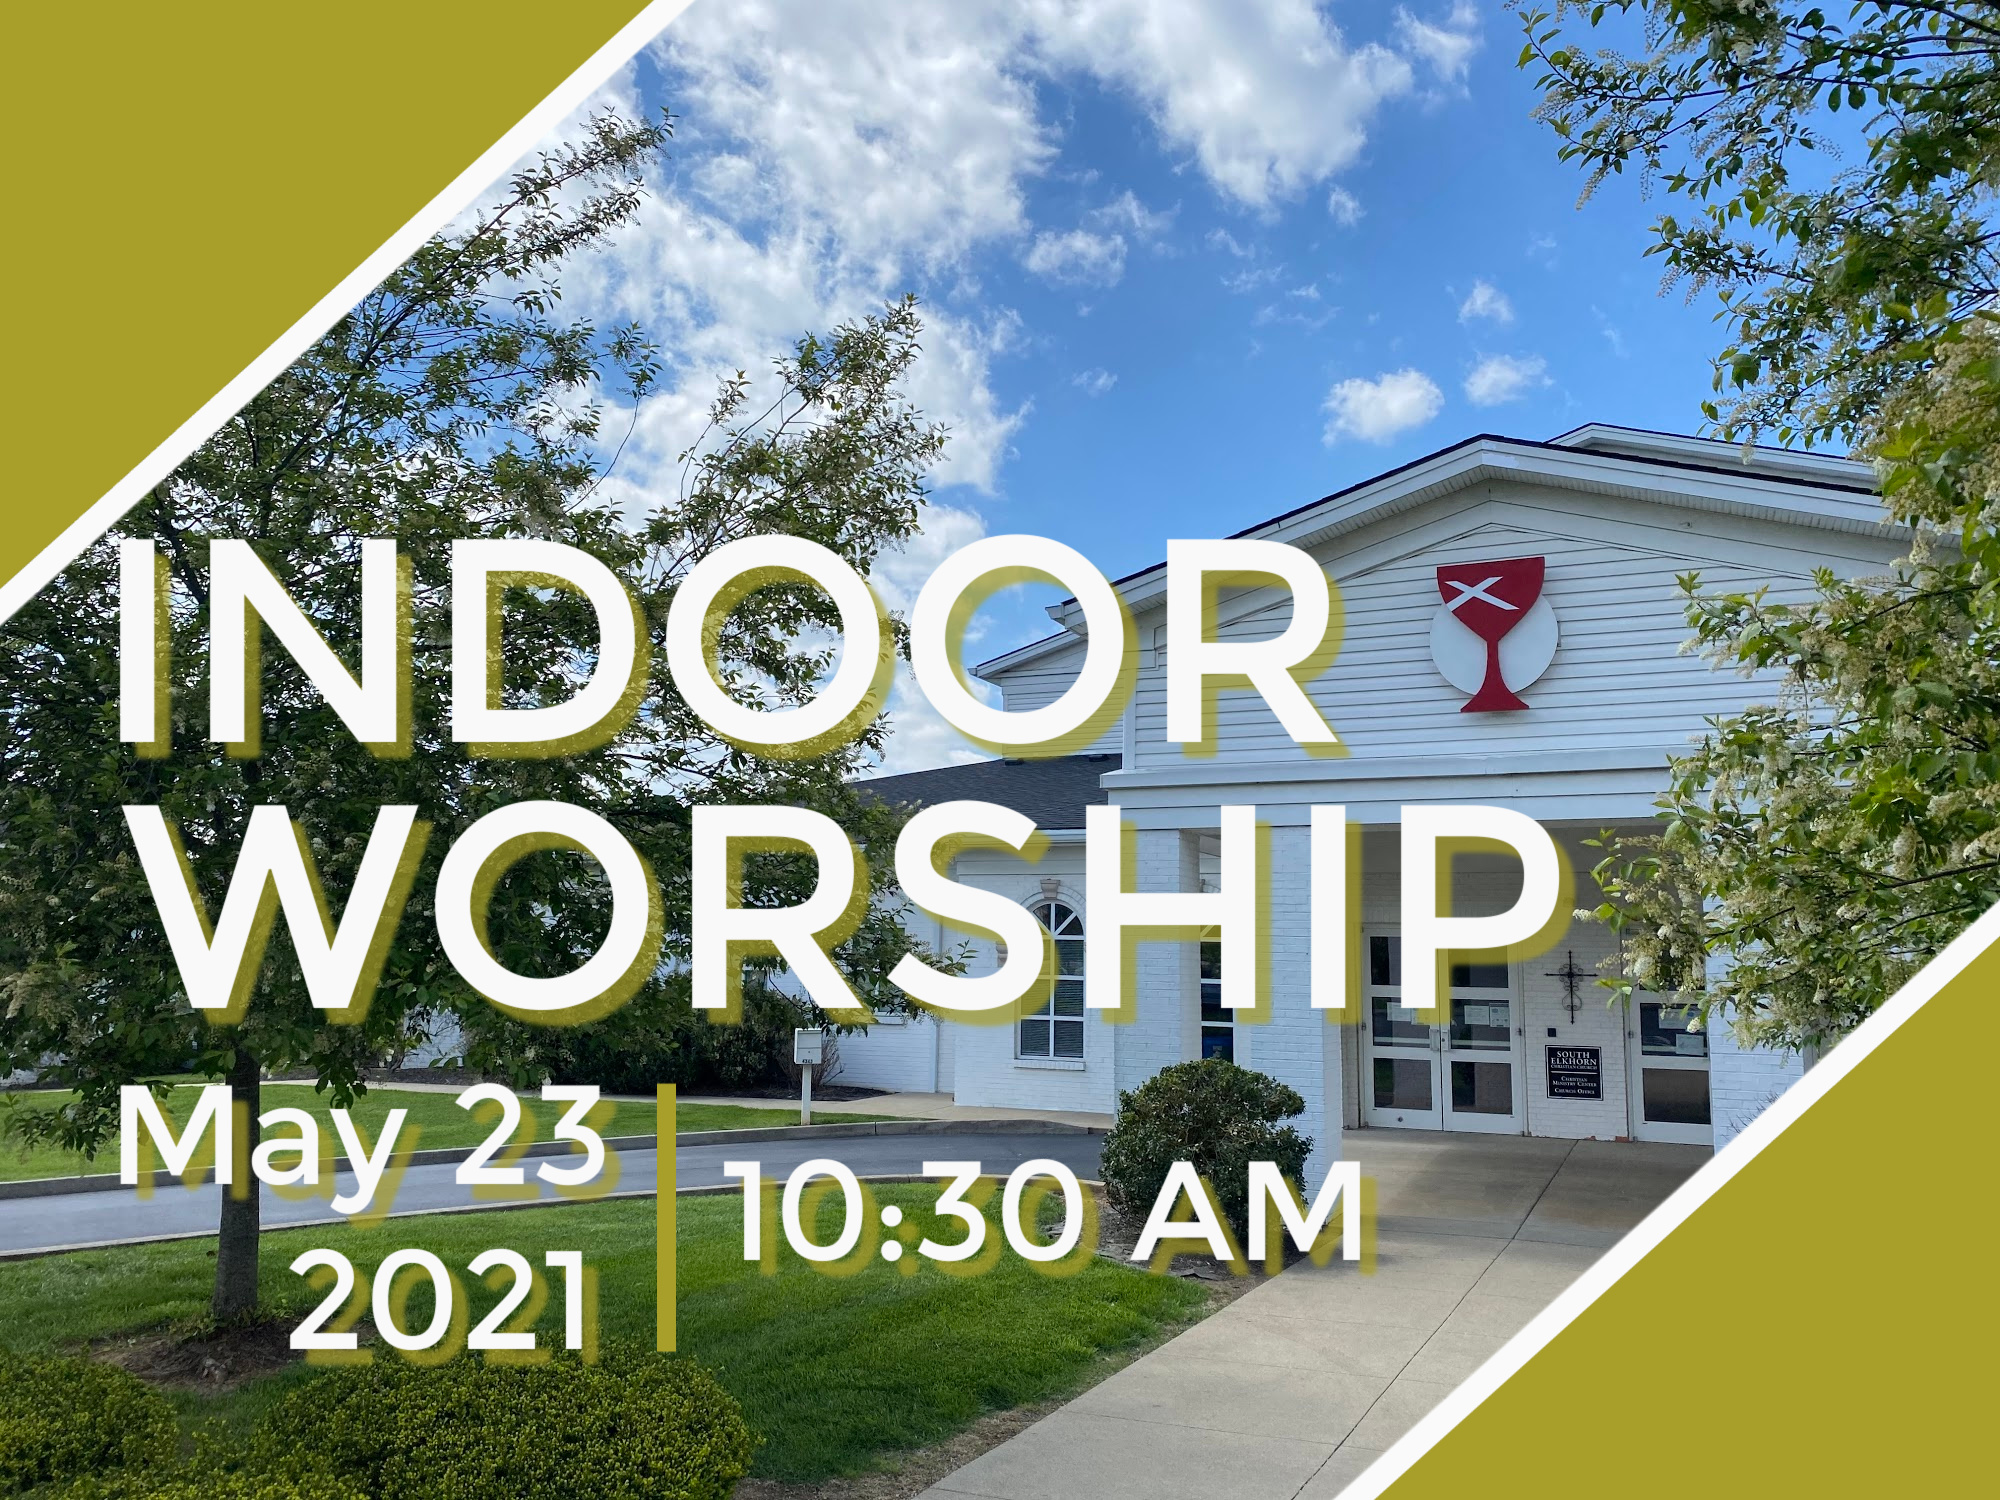 Return to indoor worship starting May 23. Two services on May 23. Learn more and register.